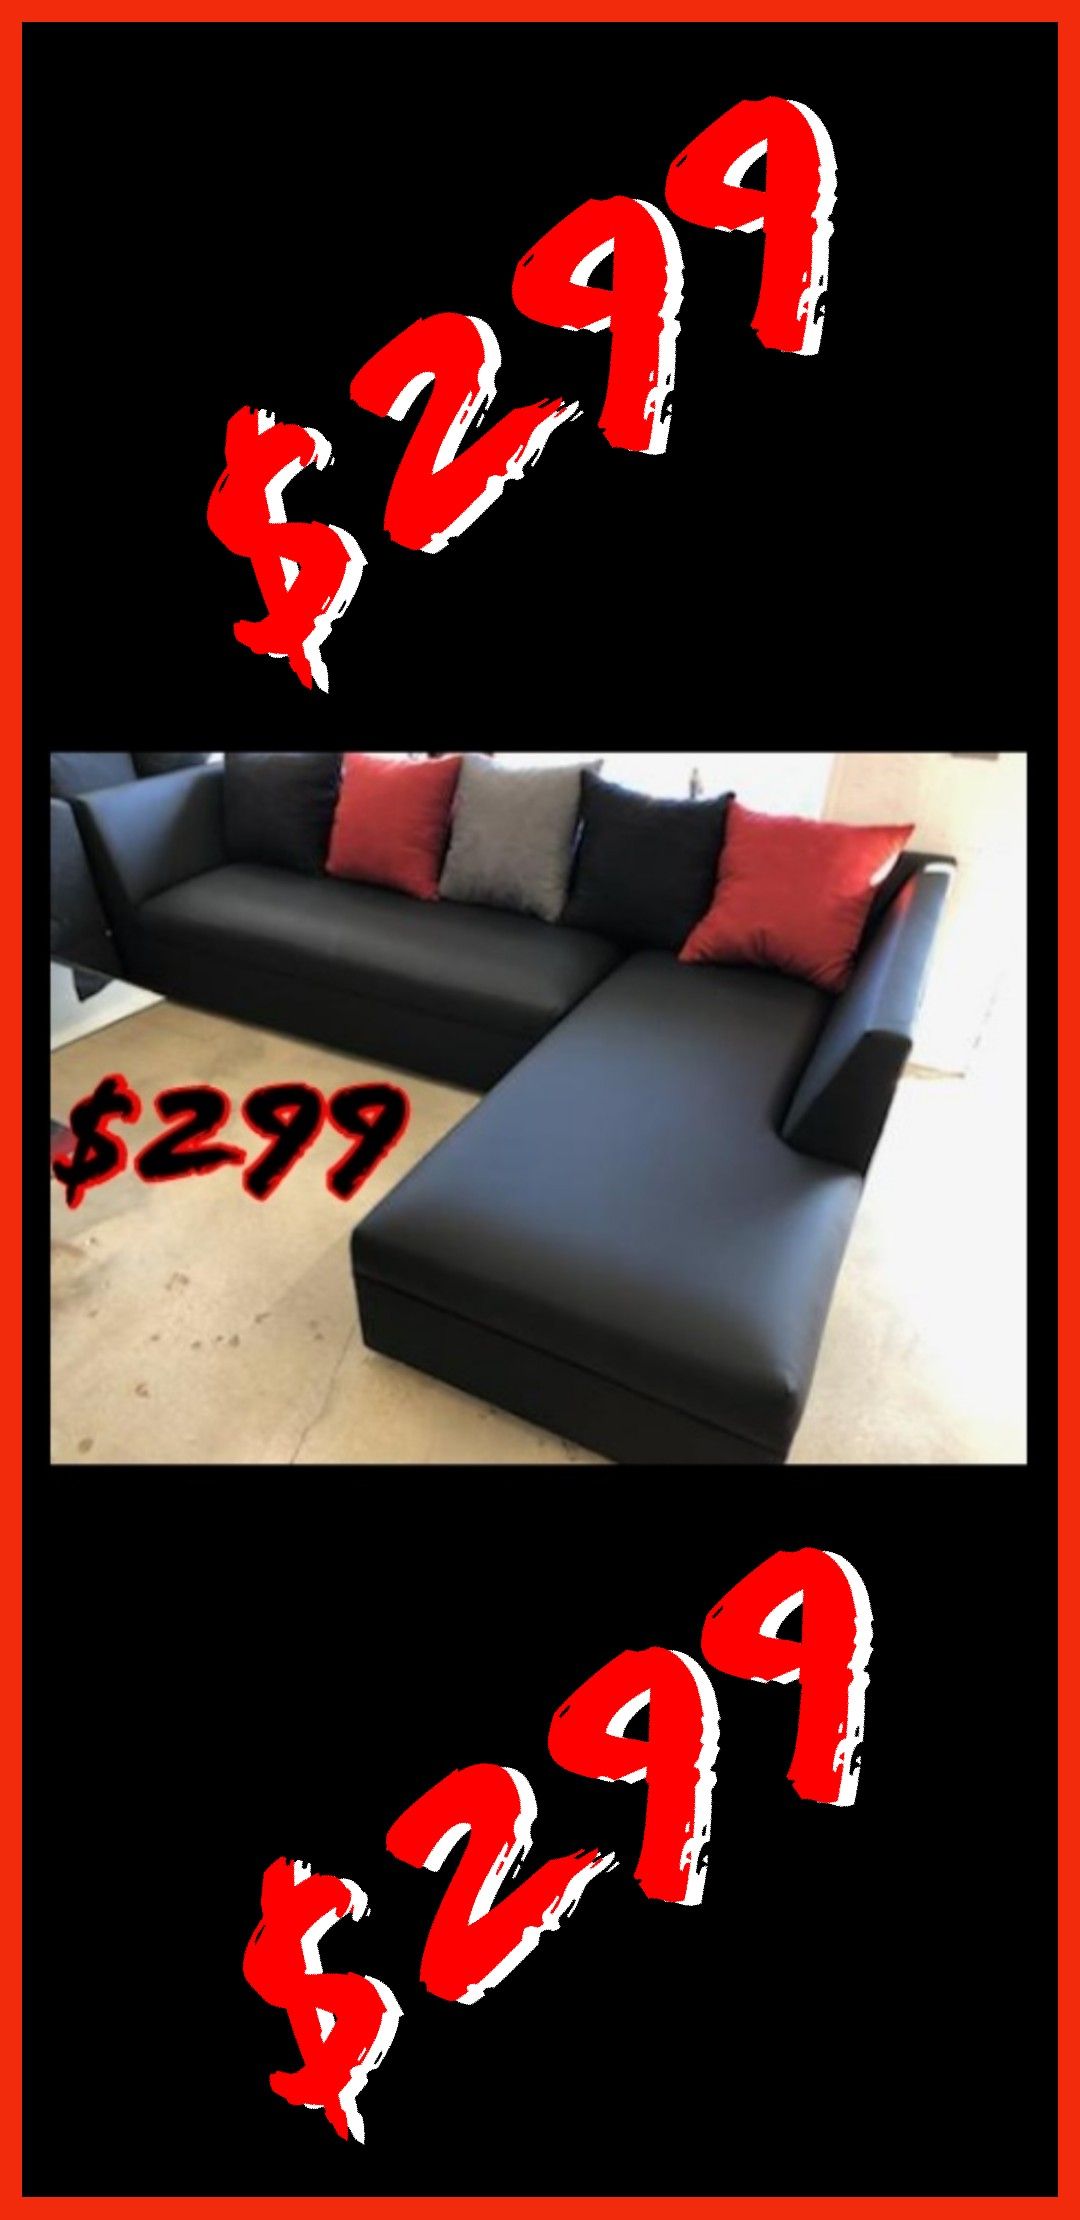 Modern Sectional Sofa couch